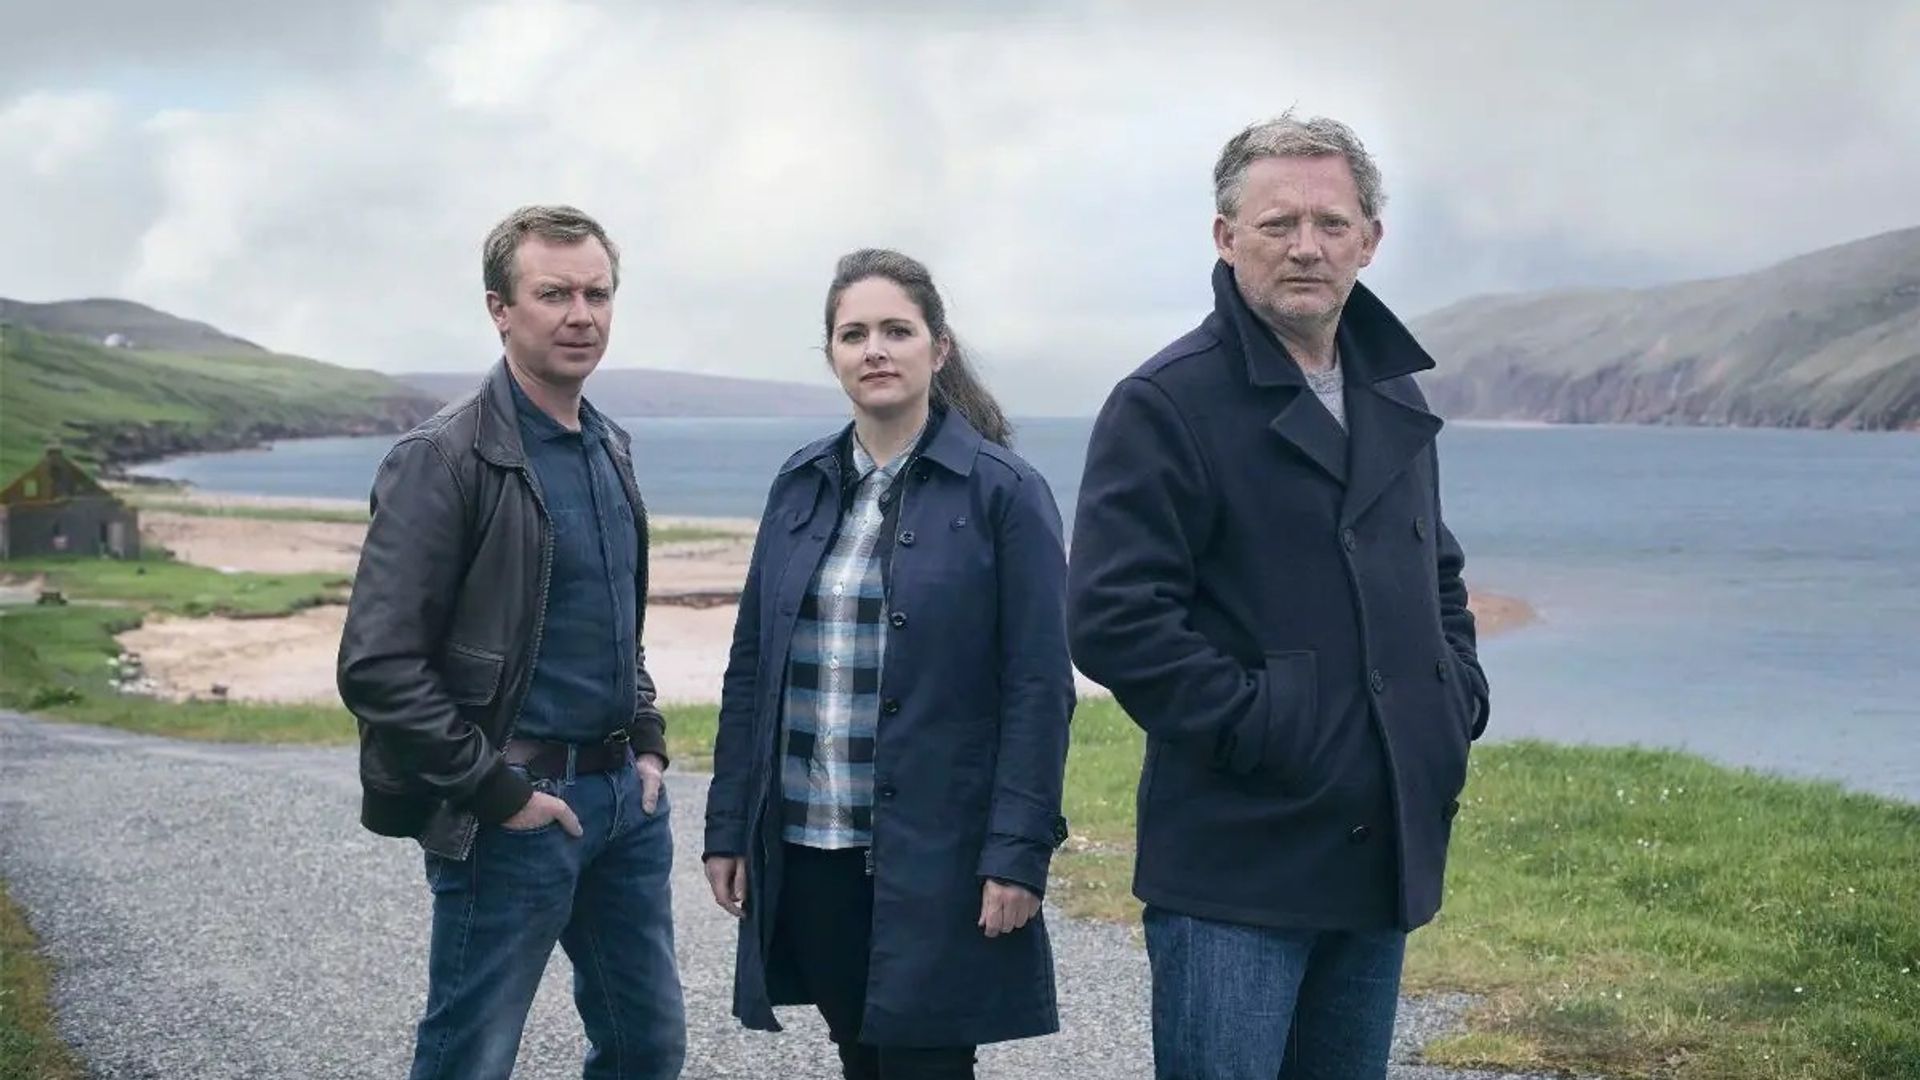 Shetland: viewers react to 'intense’ scene in fourth episode